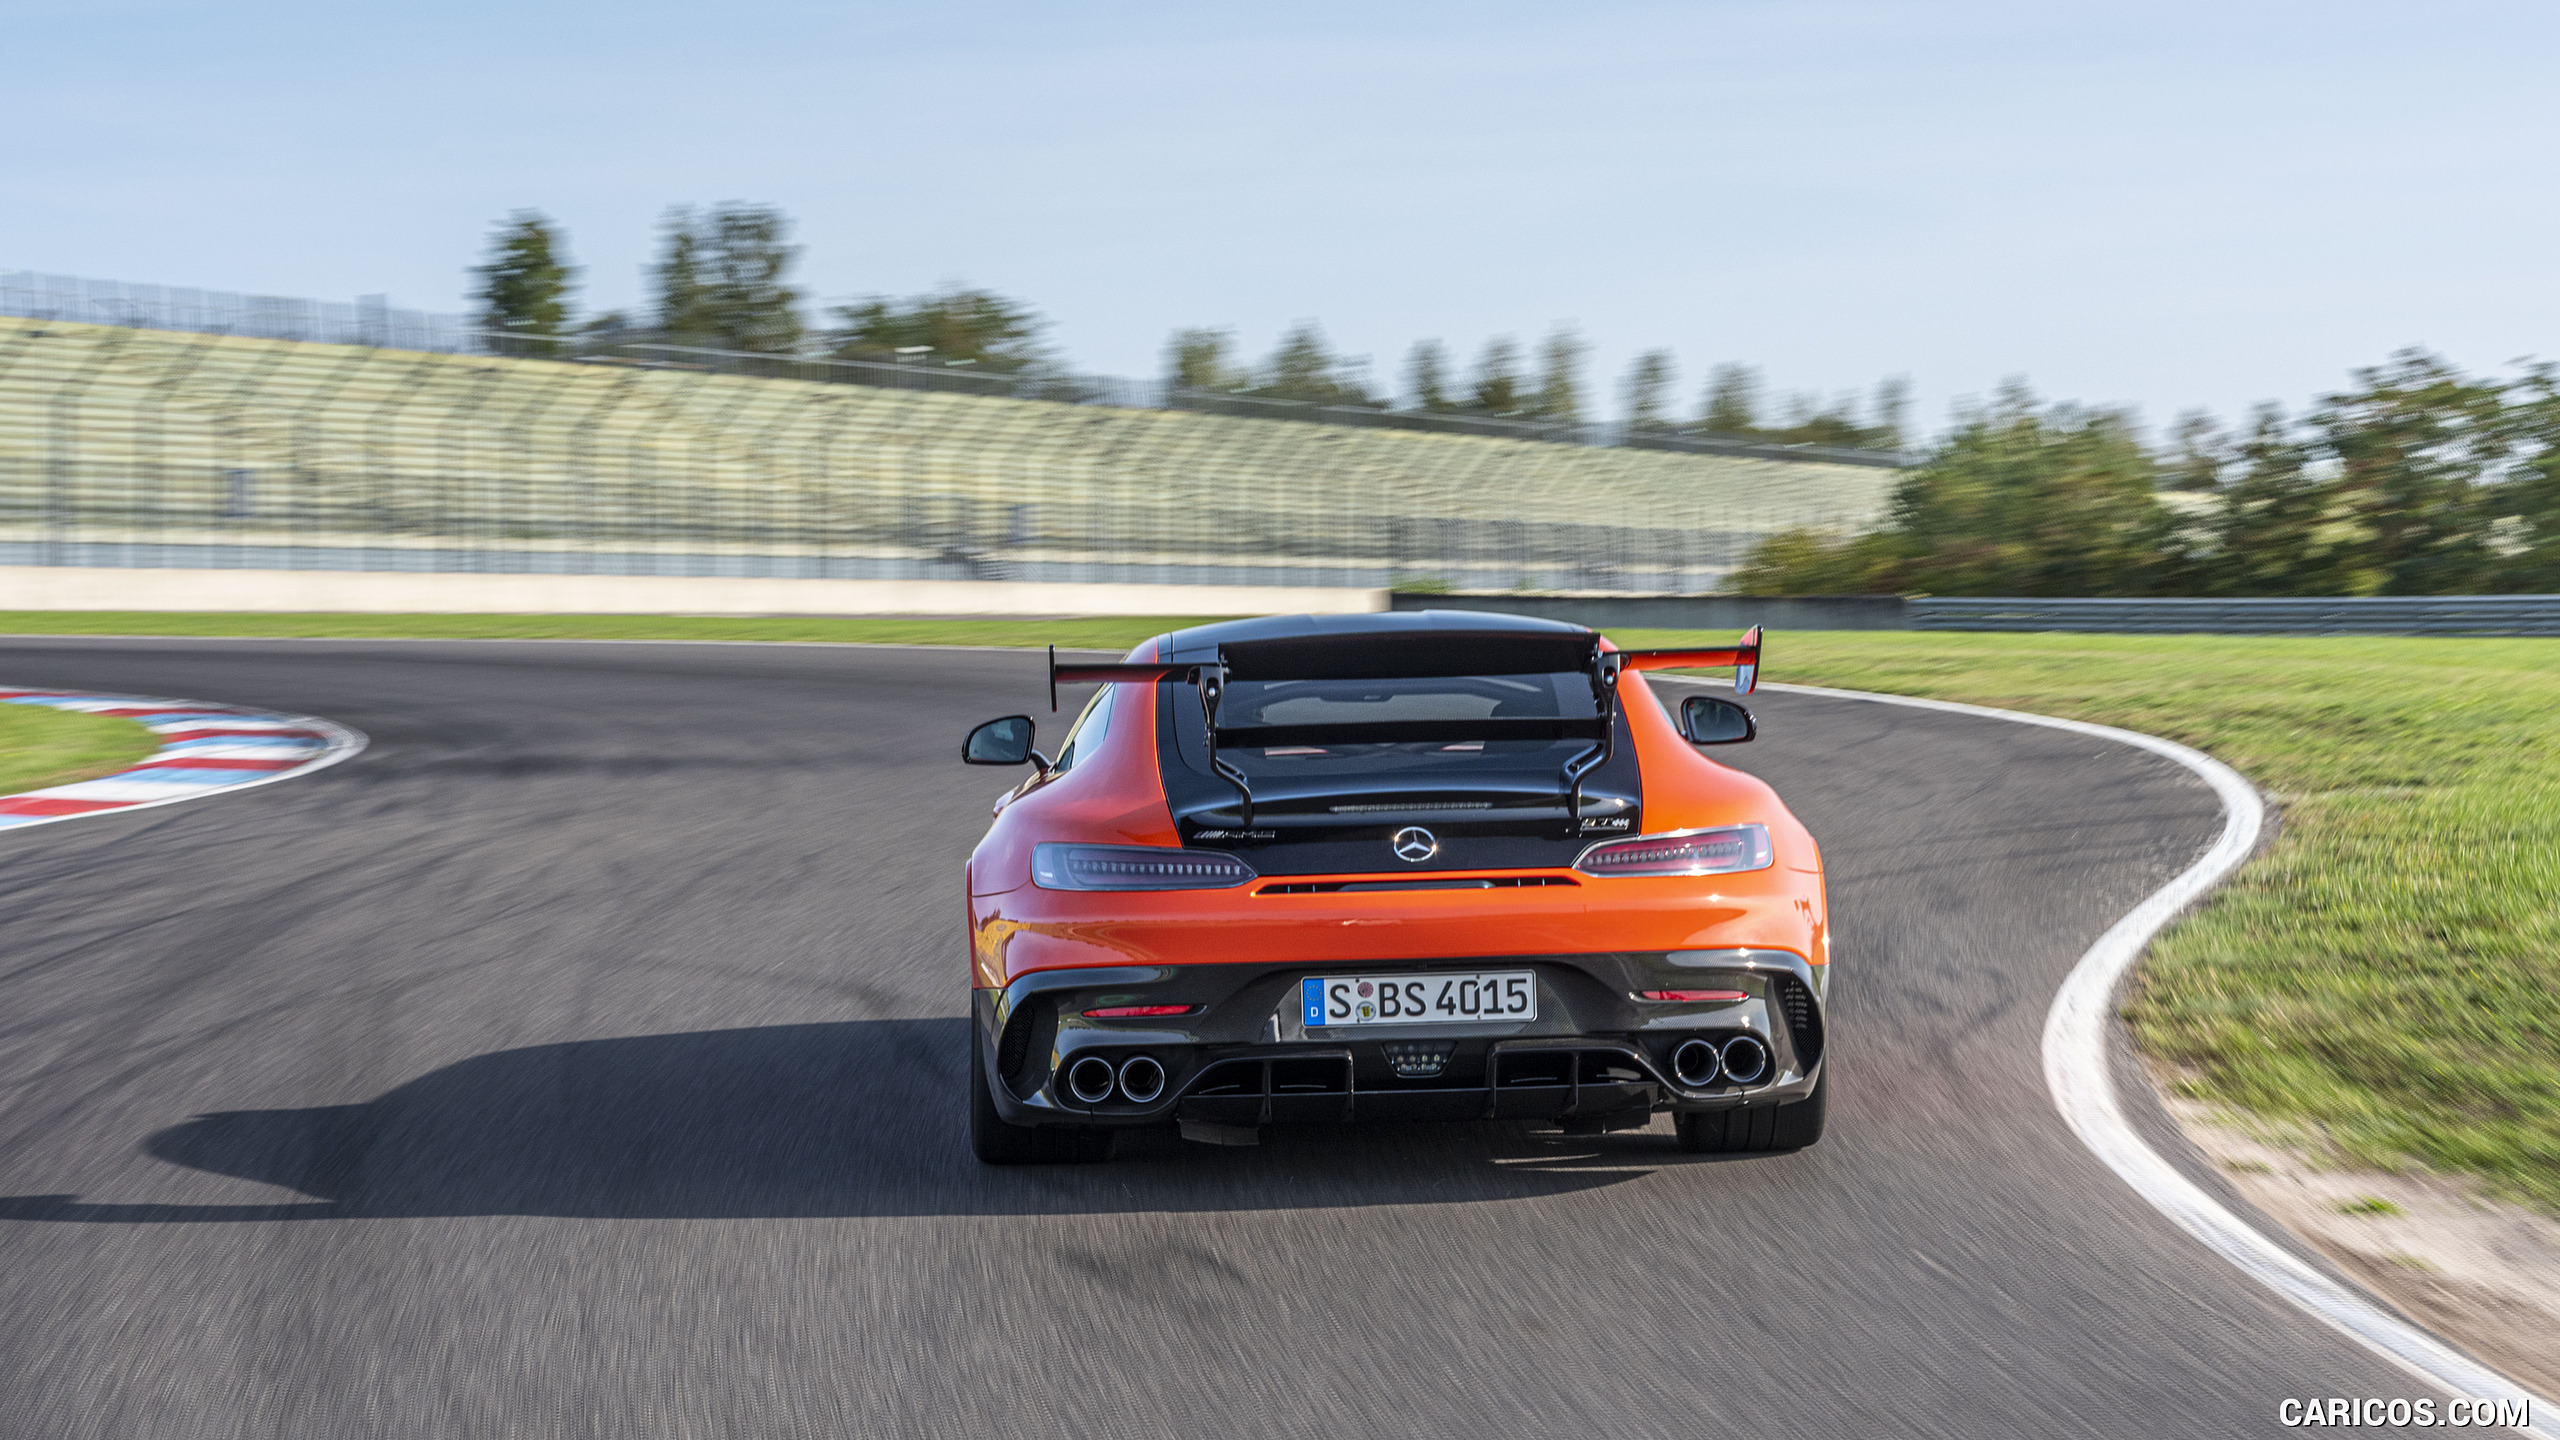 2021 Mercedes-AMG GT Black Series (Color: Magma Beam) - Rear, #115 of 215